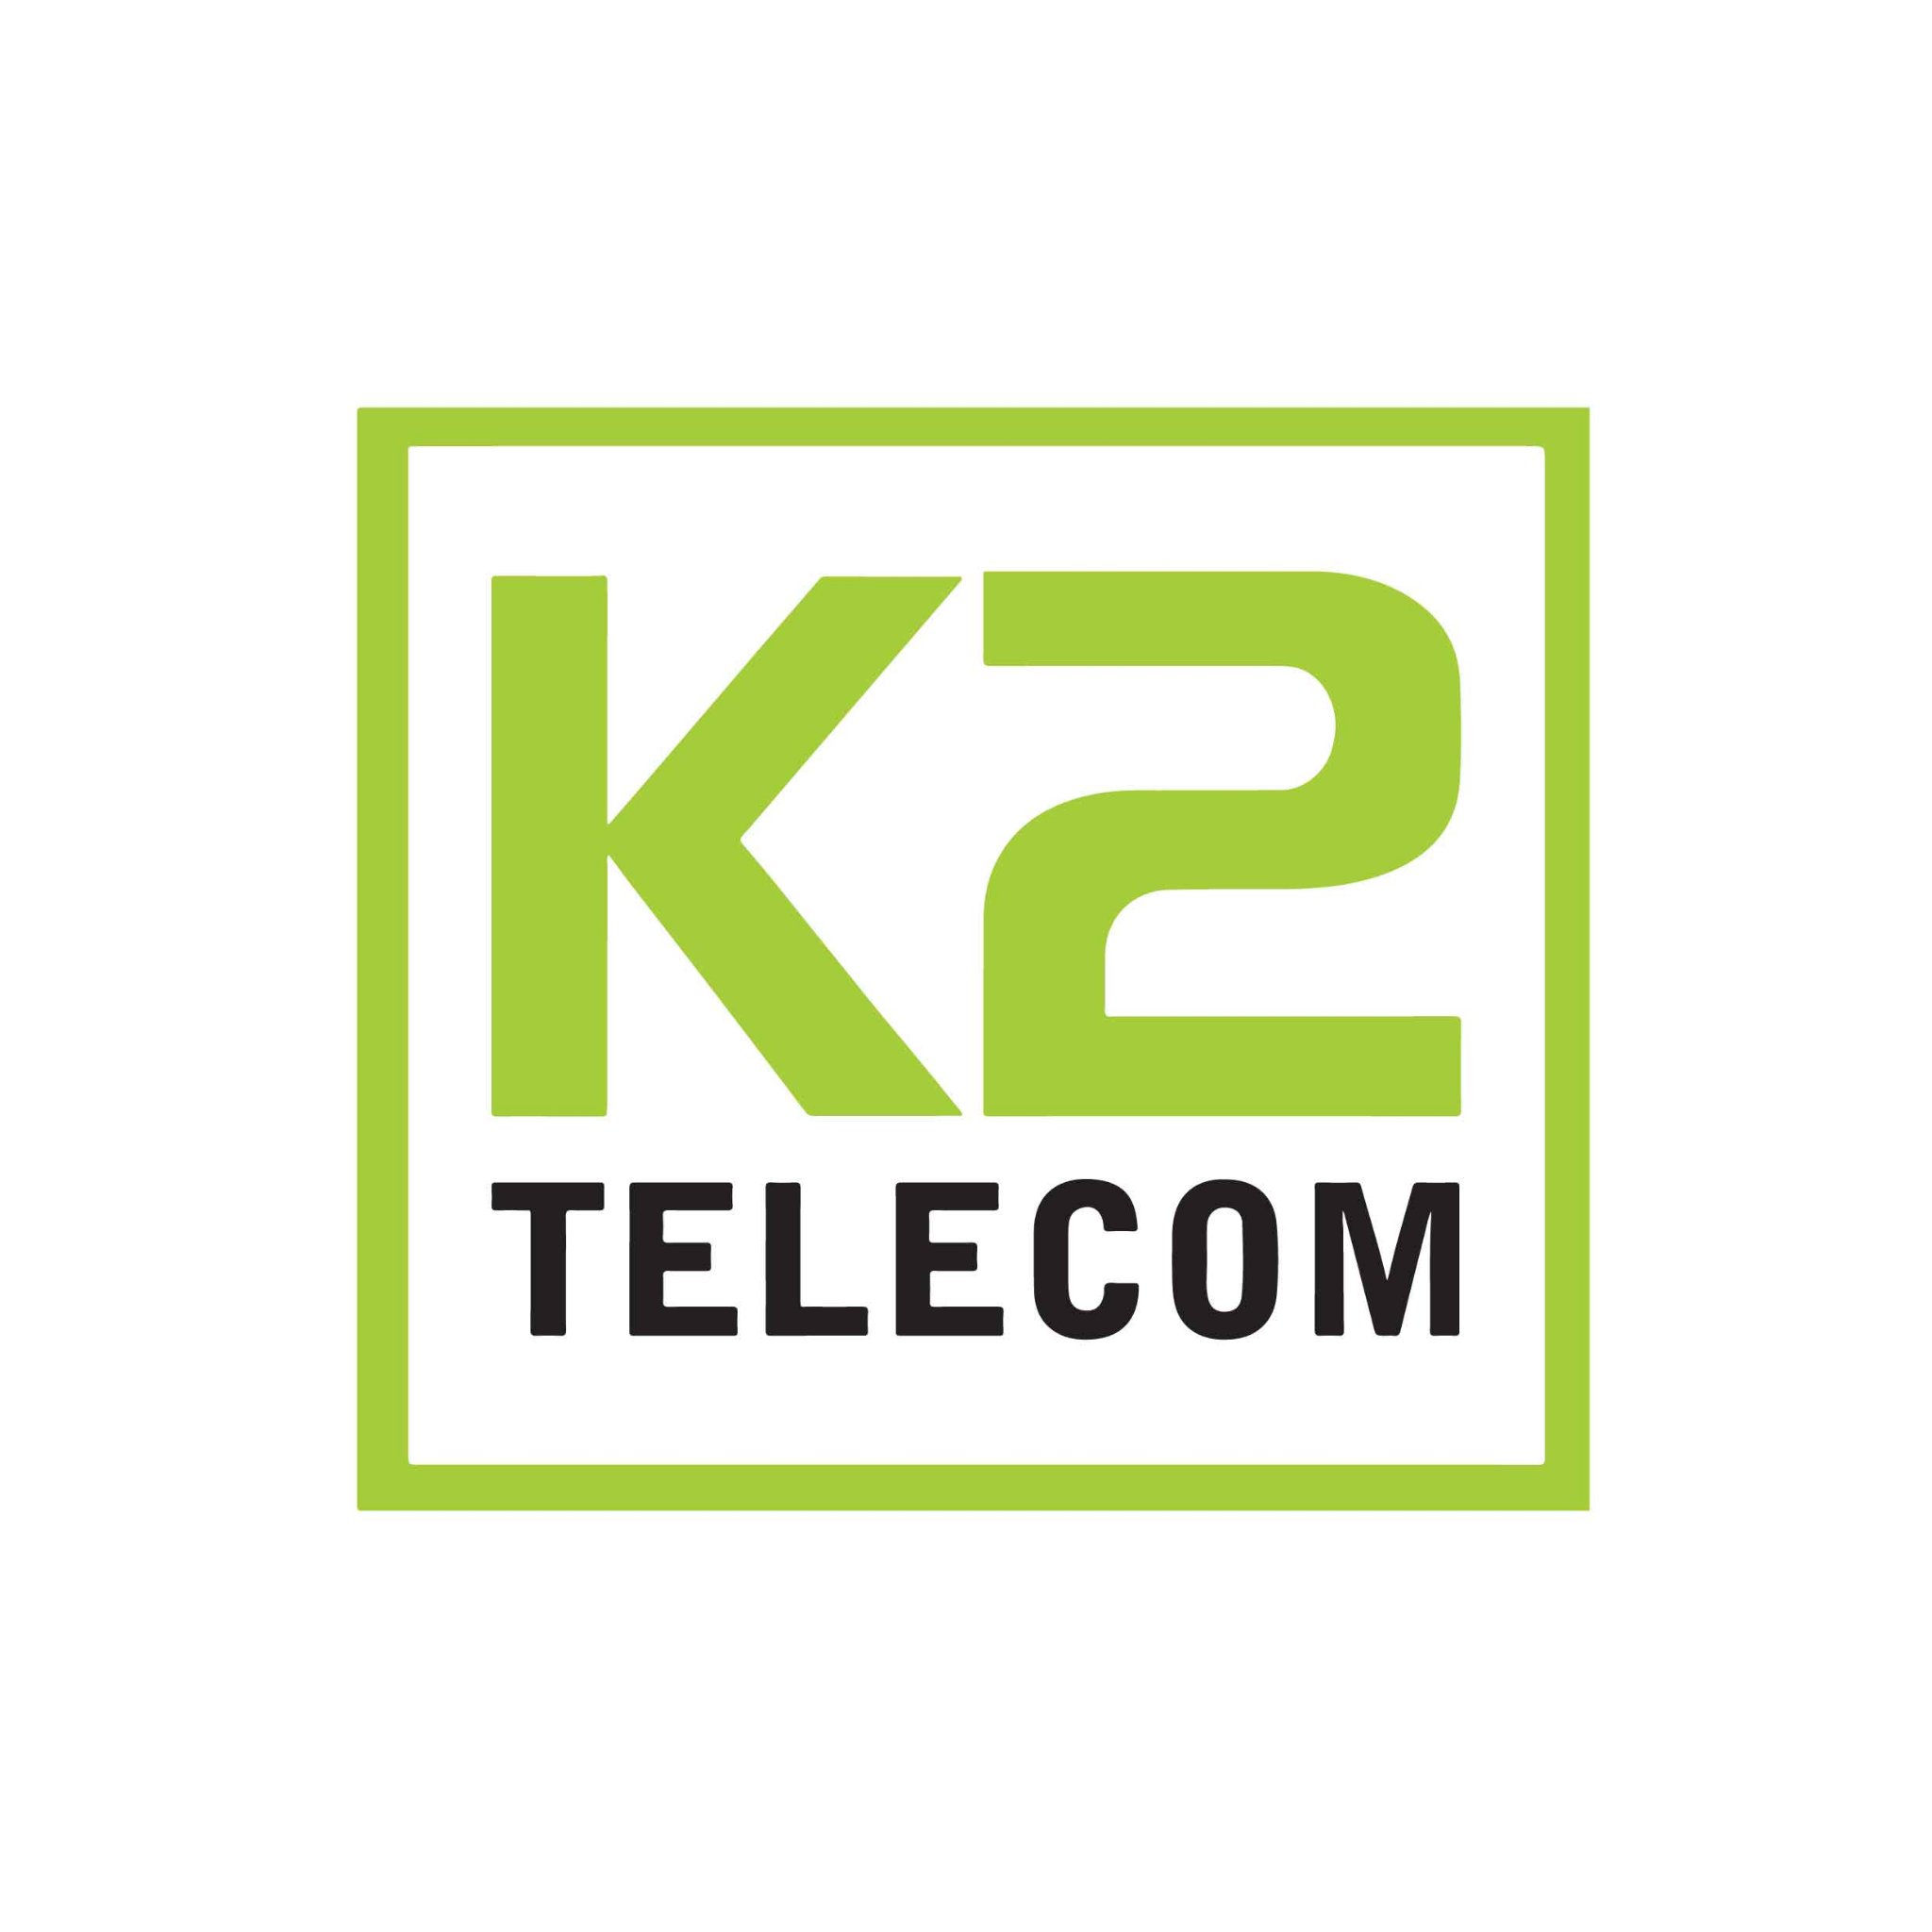 K2 Telecom is a brand with a vision to become the leading and most popular people oriented telecom brand in Uganda!